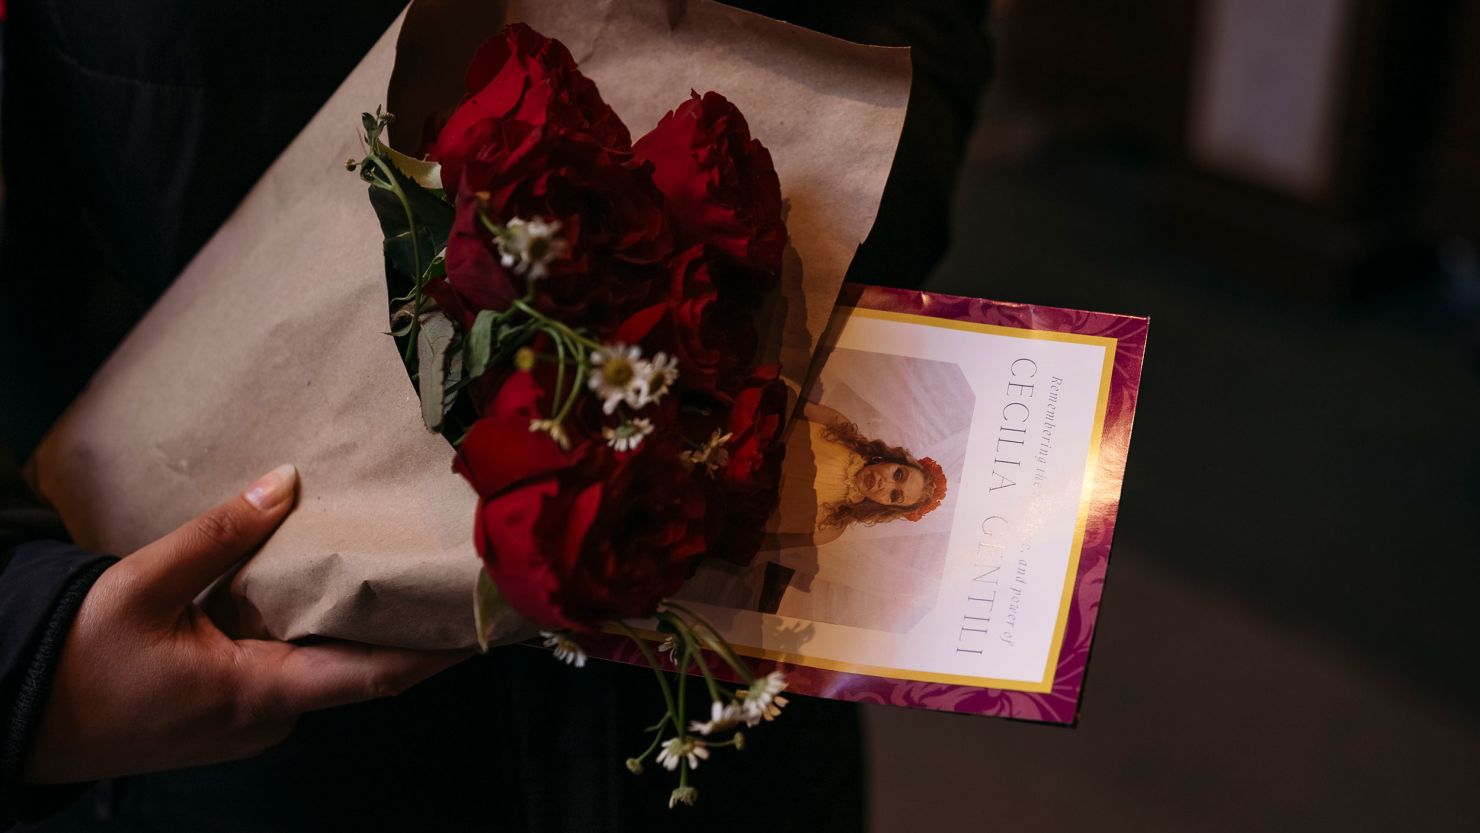 Maz George holds flowers and a pamphlet after trans activist Cecilia Gentili's February 15 funeral at St. Patrick's Cathedral in New York.